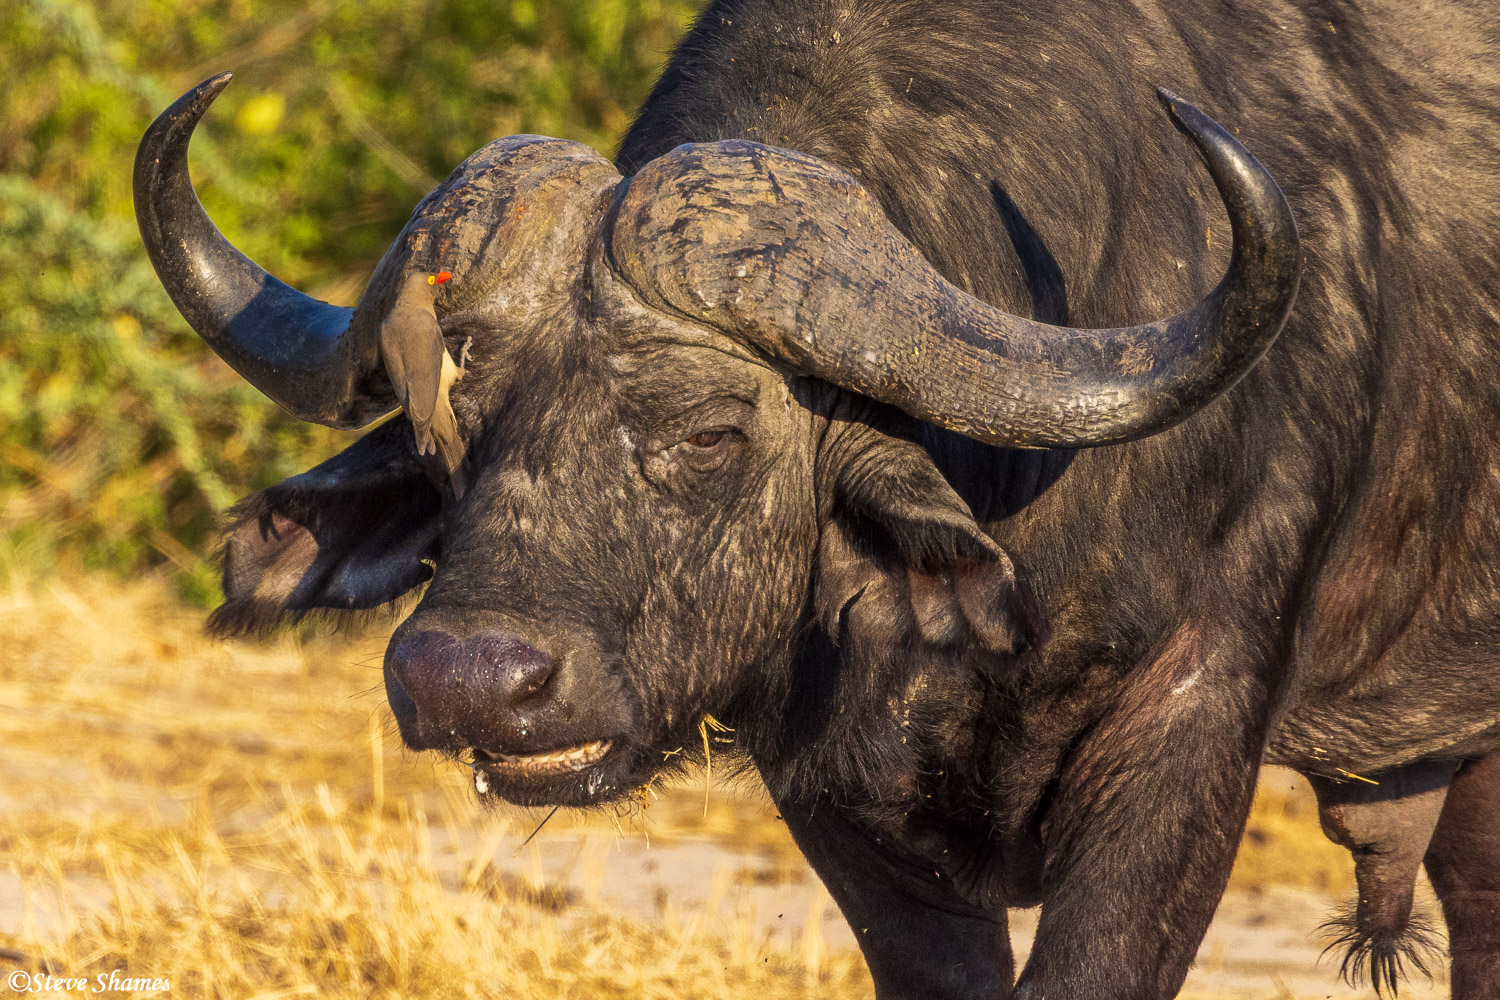 Grizzled old bull cape buffalo, always with an oxpecker companion.